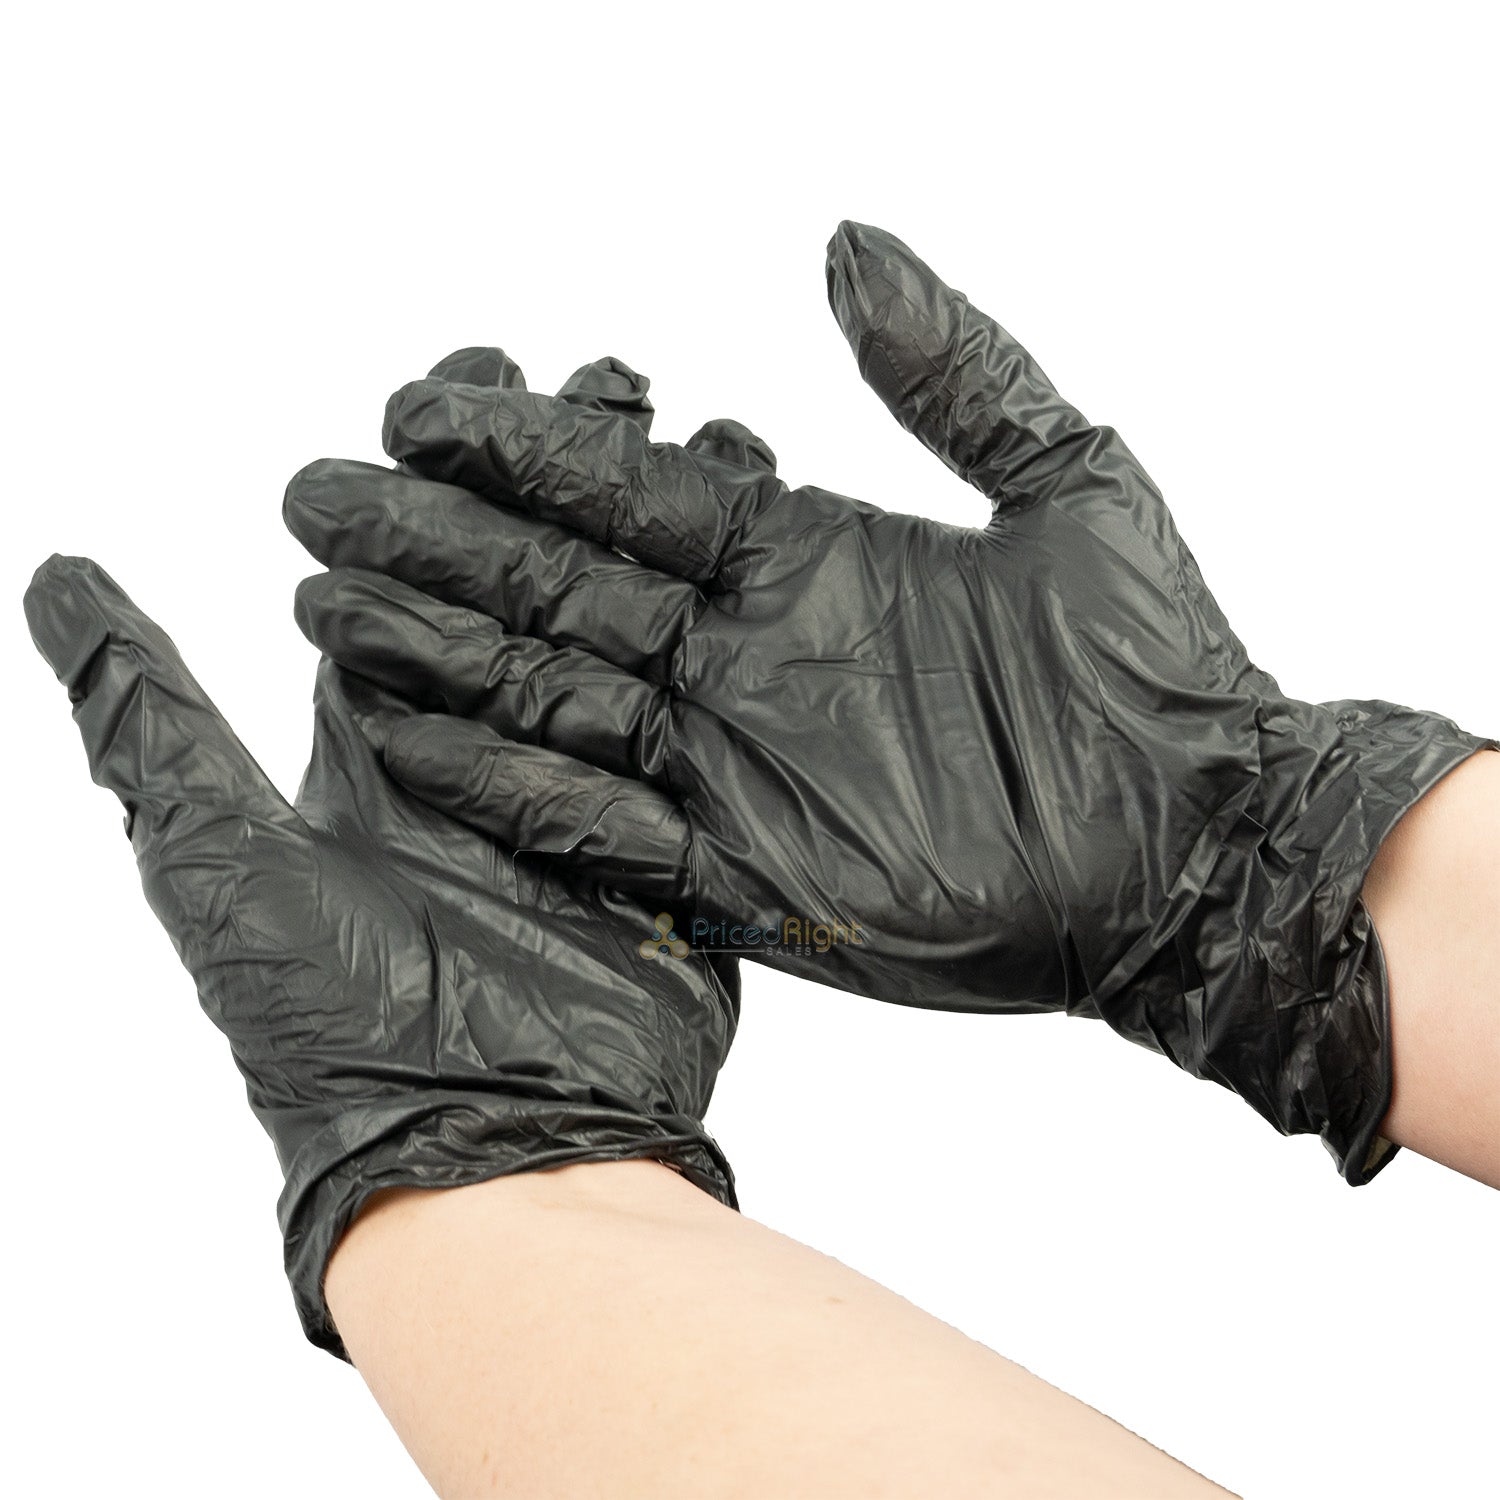 Black Nitrile Disposable Gloves Powder Latex Free Industrial X-Large 200 Count